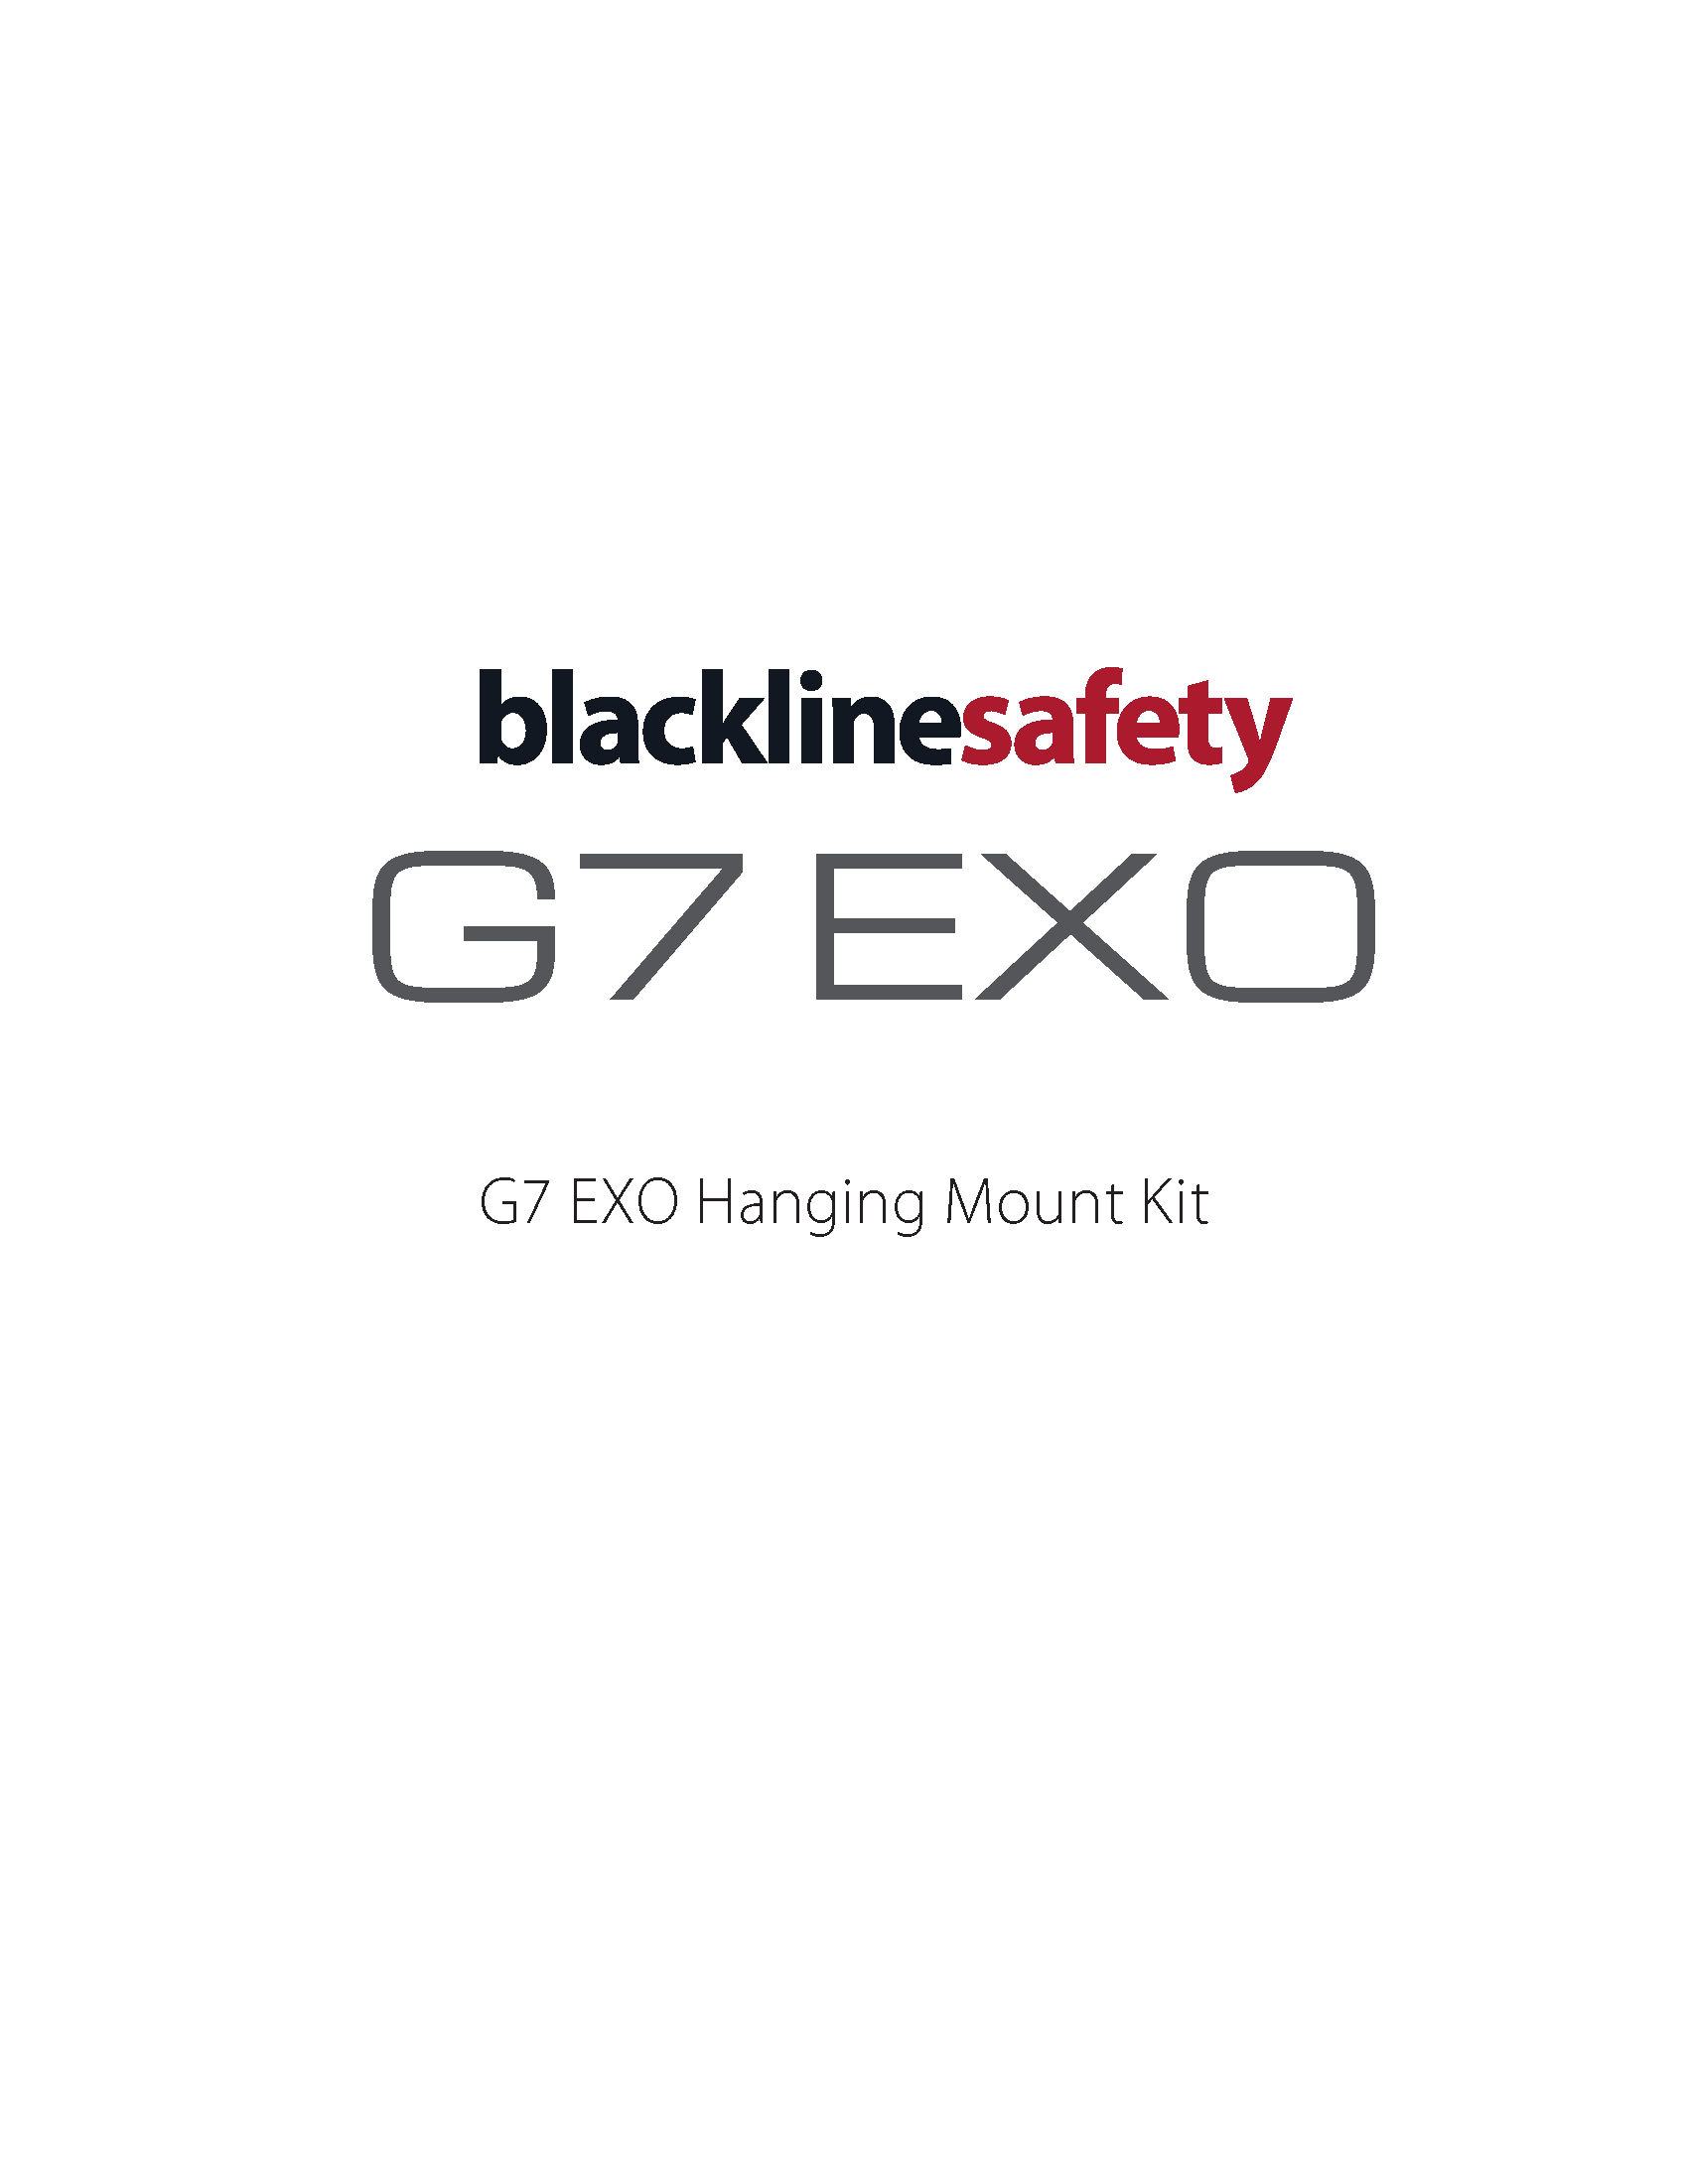 G7 EXO Hanging Mount Kit Guide Cover Page